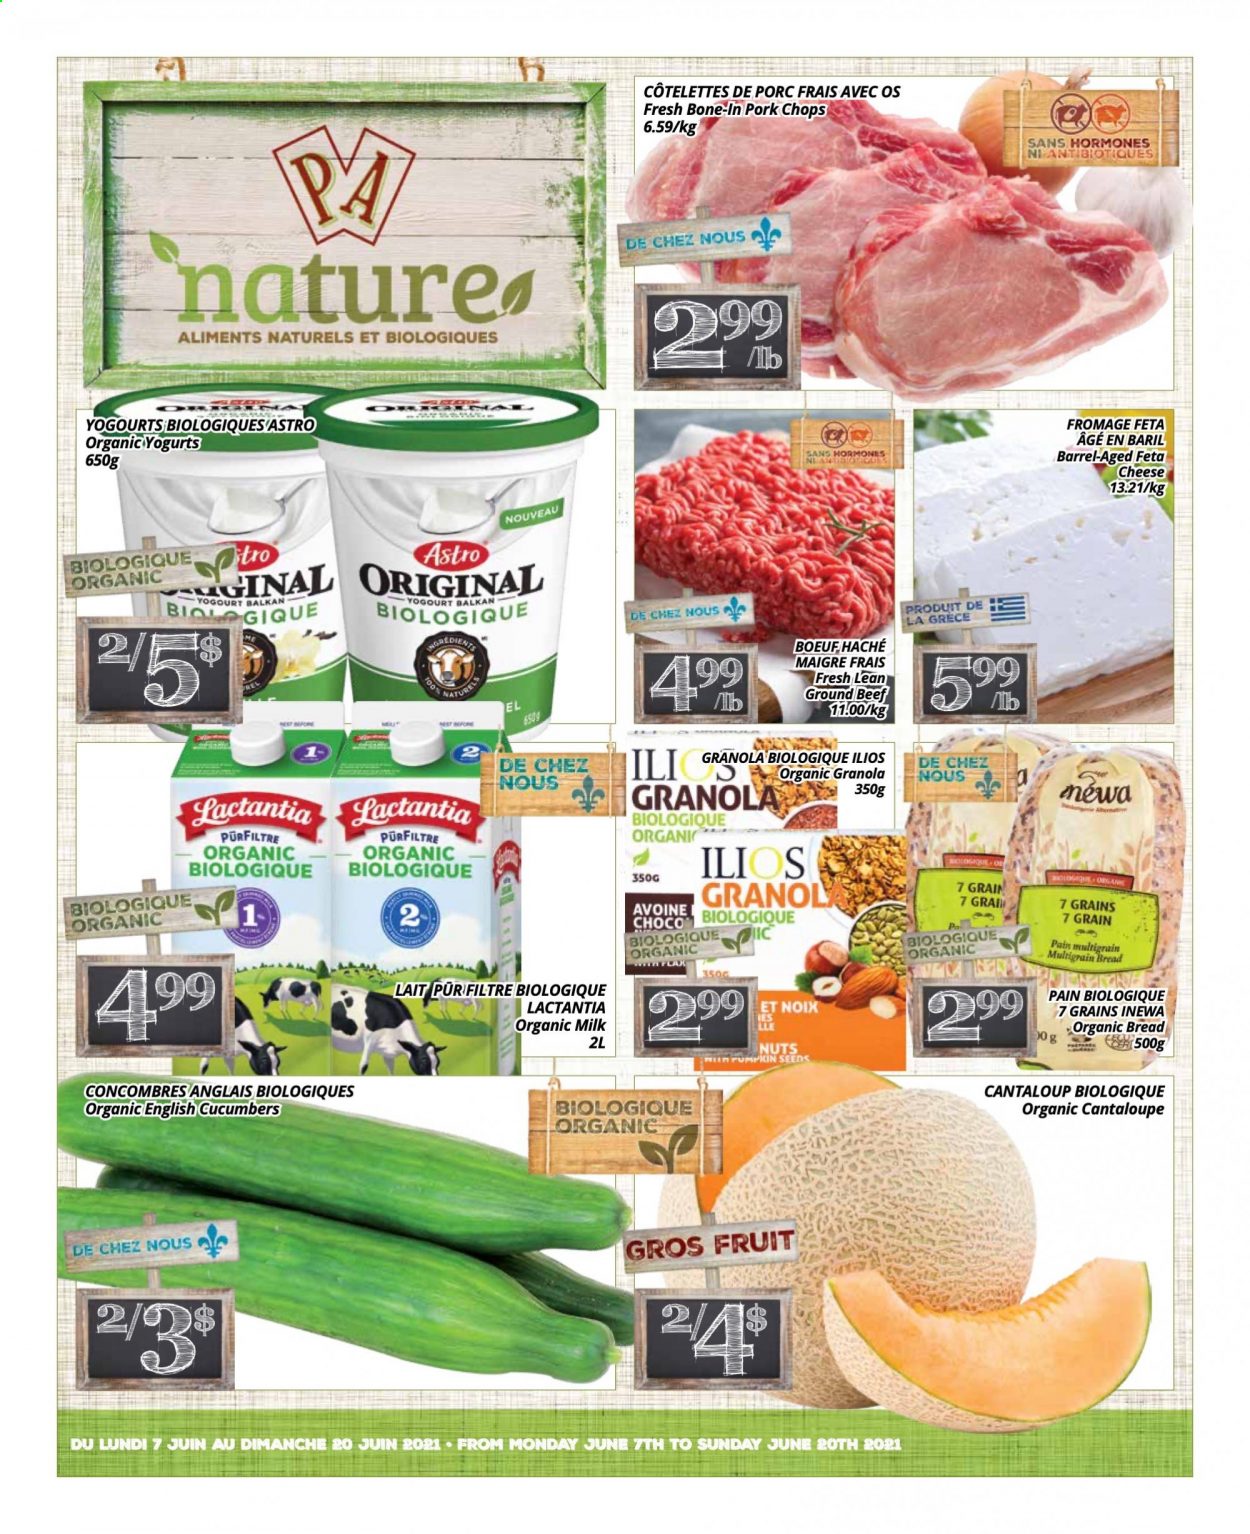 thumbnail - PA Nature Flyer - June 07, 2021 - June 20, 2021 - Sales products - bread, multigrain bread, cantaloupe, cucumber, cheese, feta, organic milk, beef meat, ground beef, pork chops, pork meat, granola. Page 1.